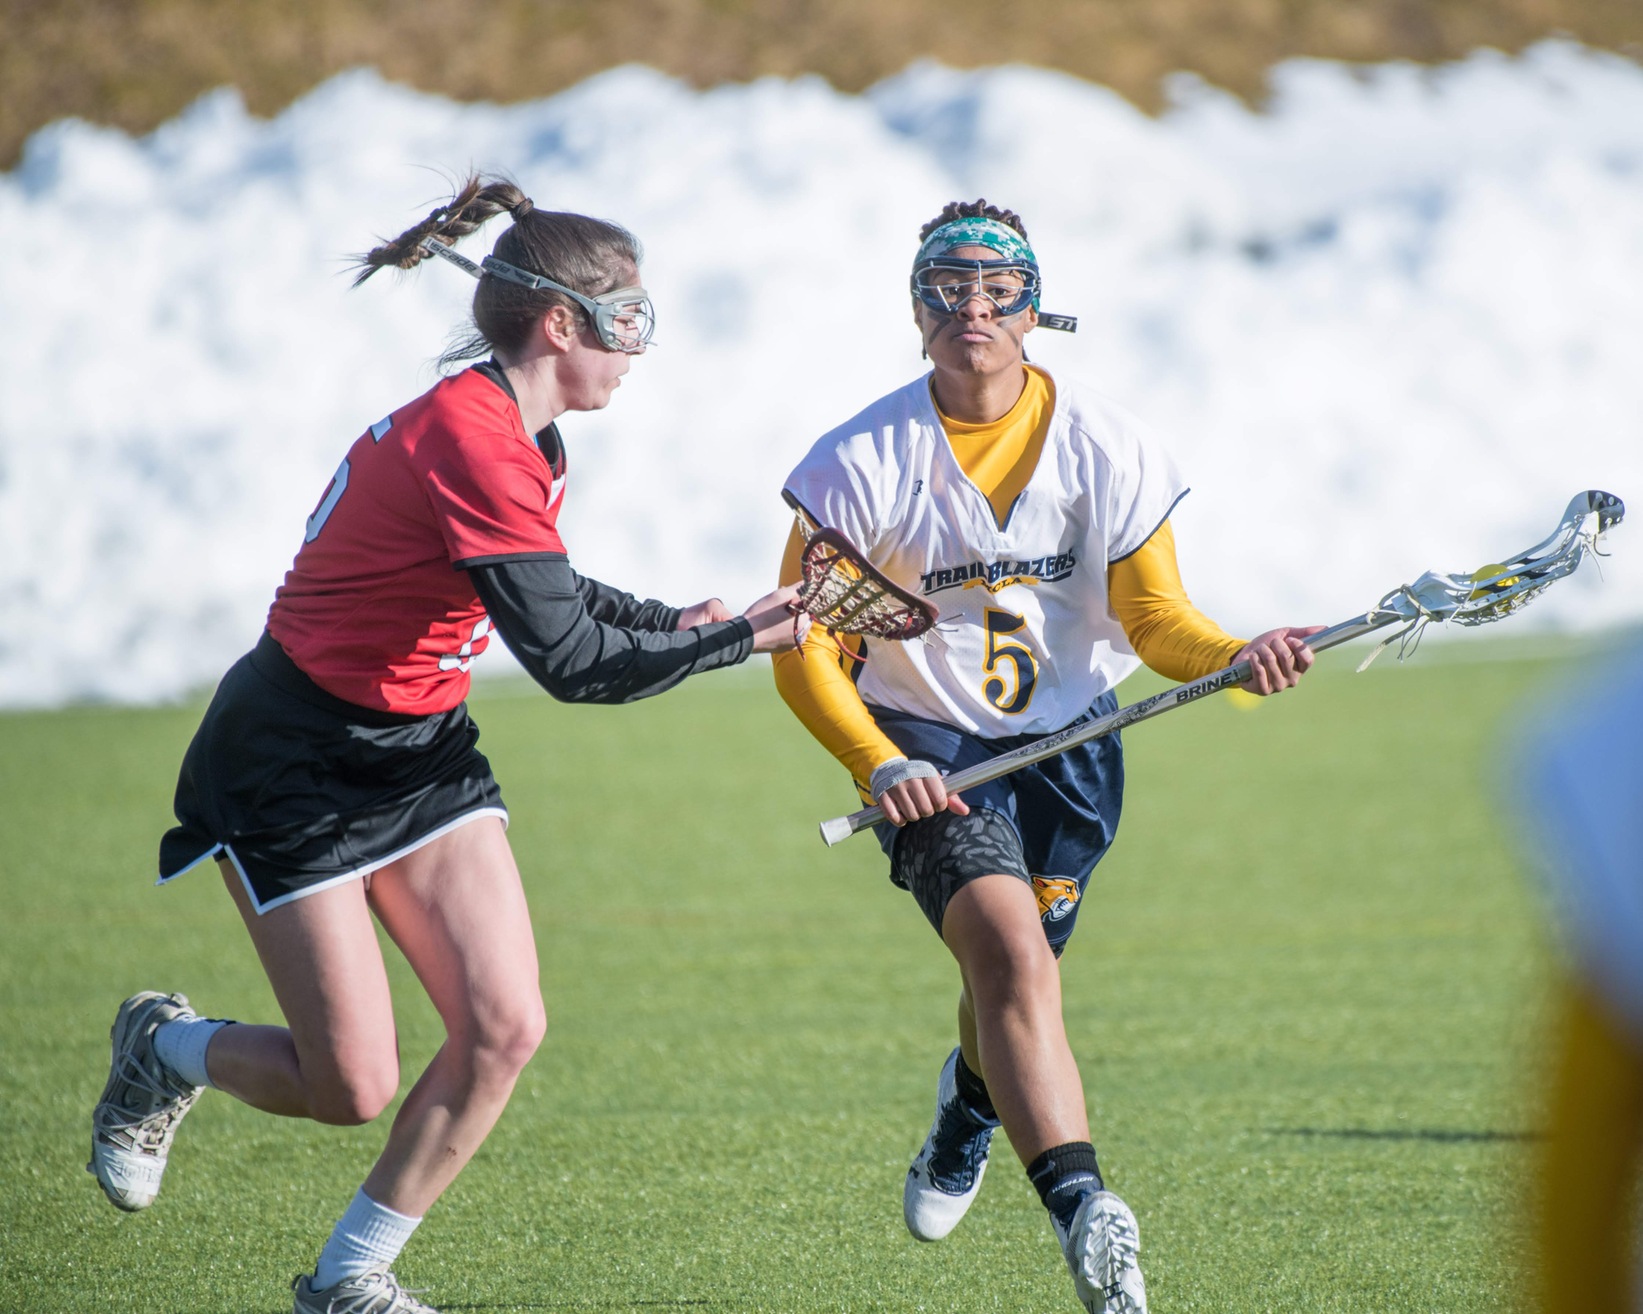 Women's Lacrosse wraps up season with loss at Bridgewater State